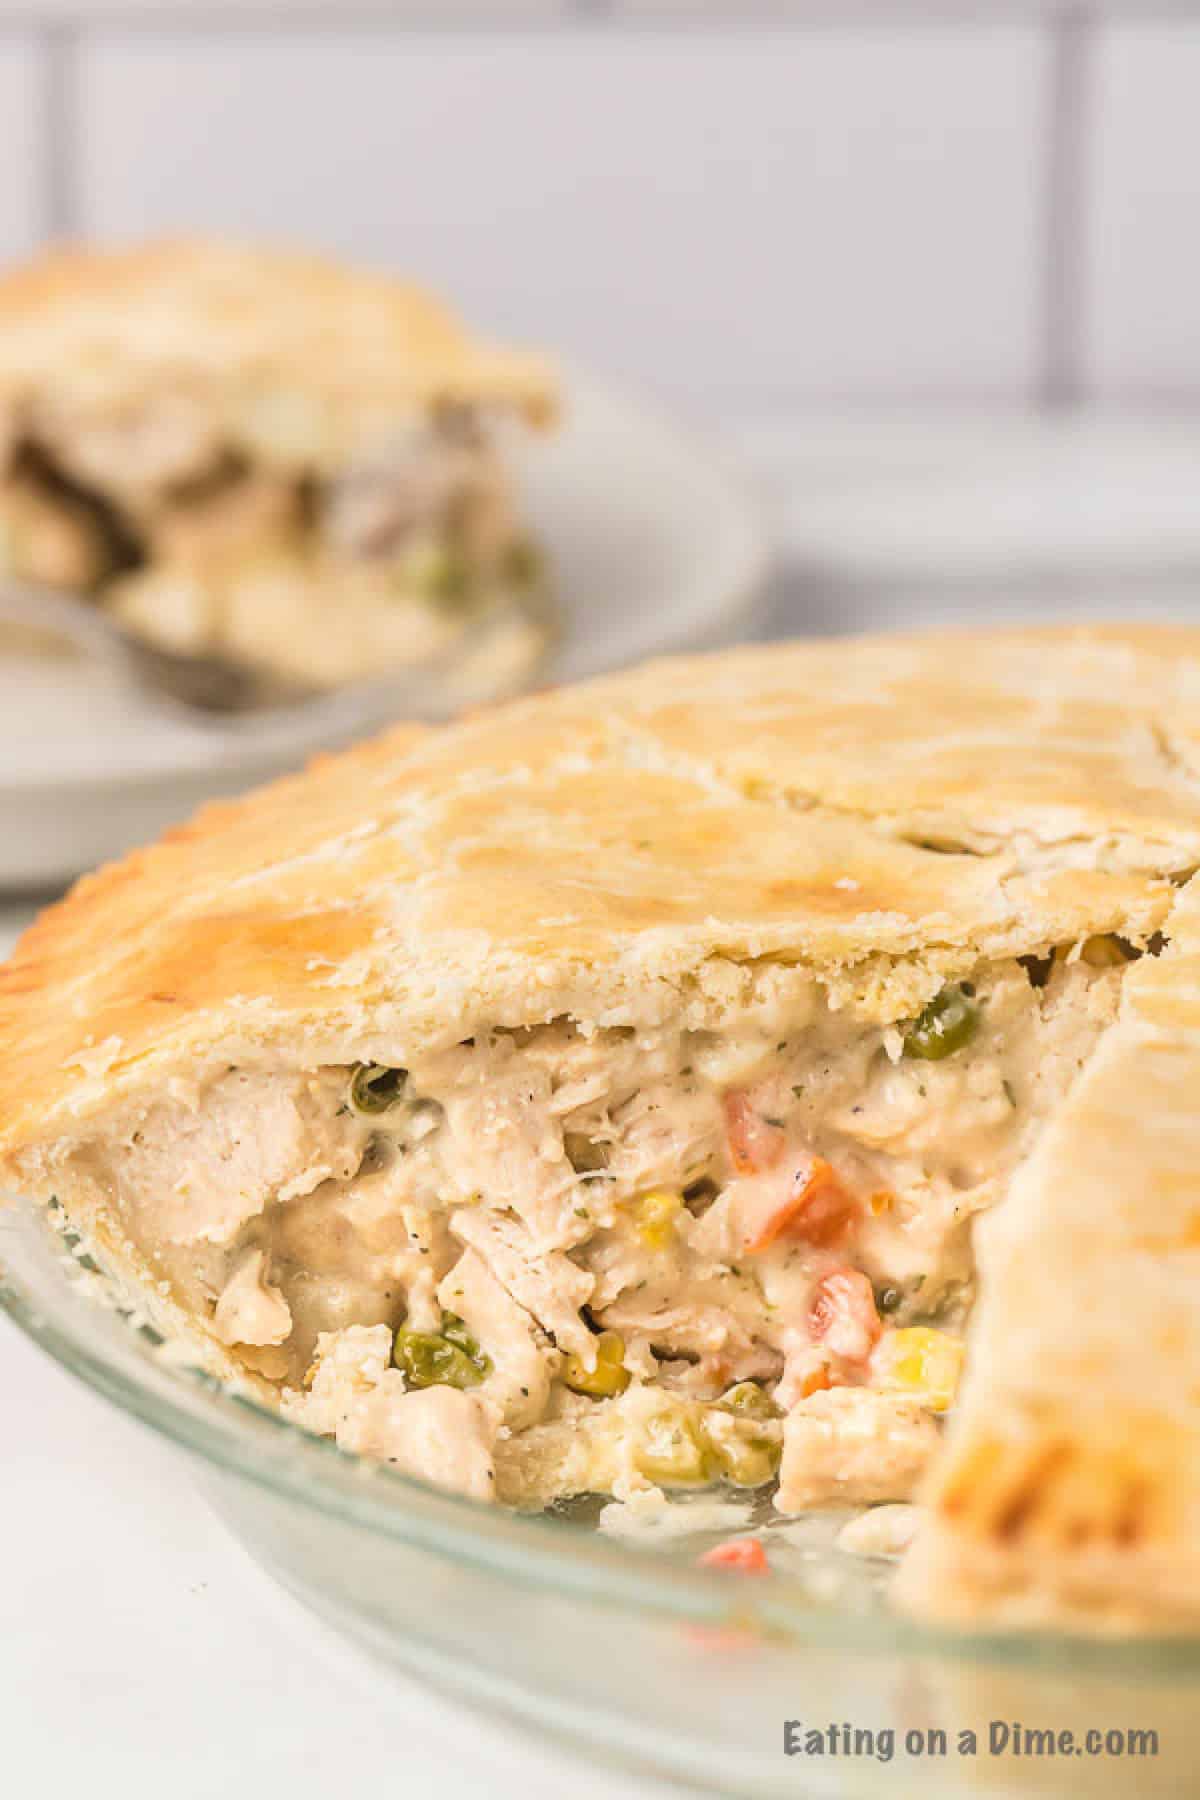 Double crust chicken pot pie in a pie plate with a slice missing